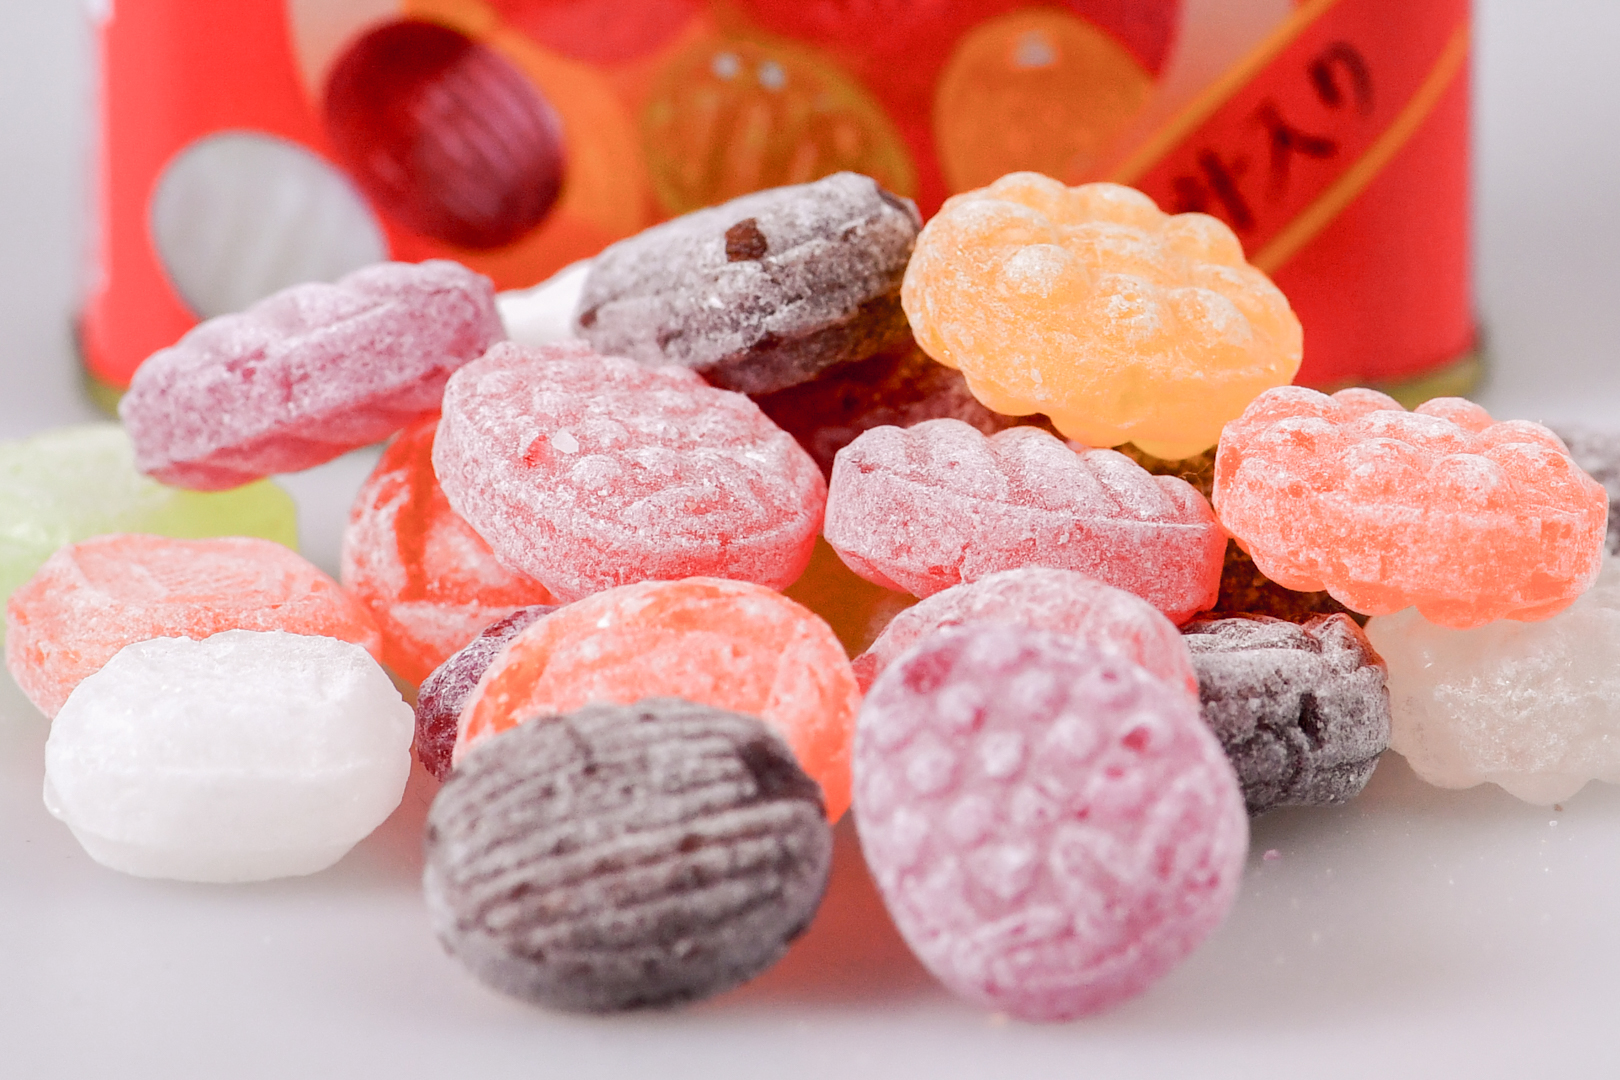 A colorful mix of fruit-flavored hard candies on a white surface with the red metal tin packaging partially in view behind.